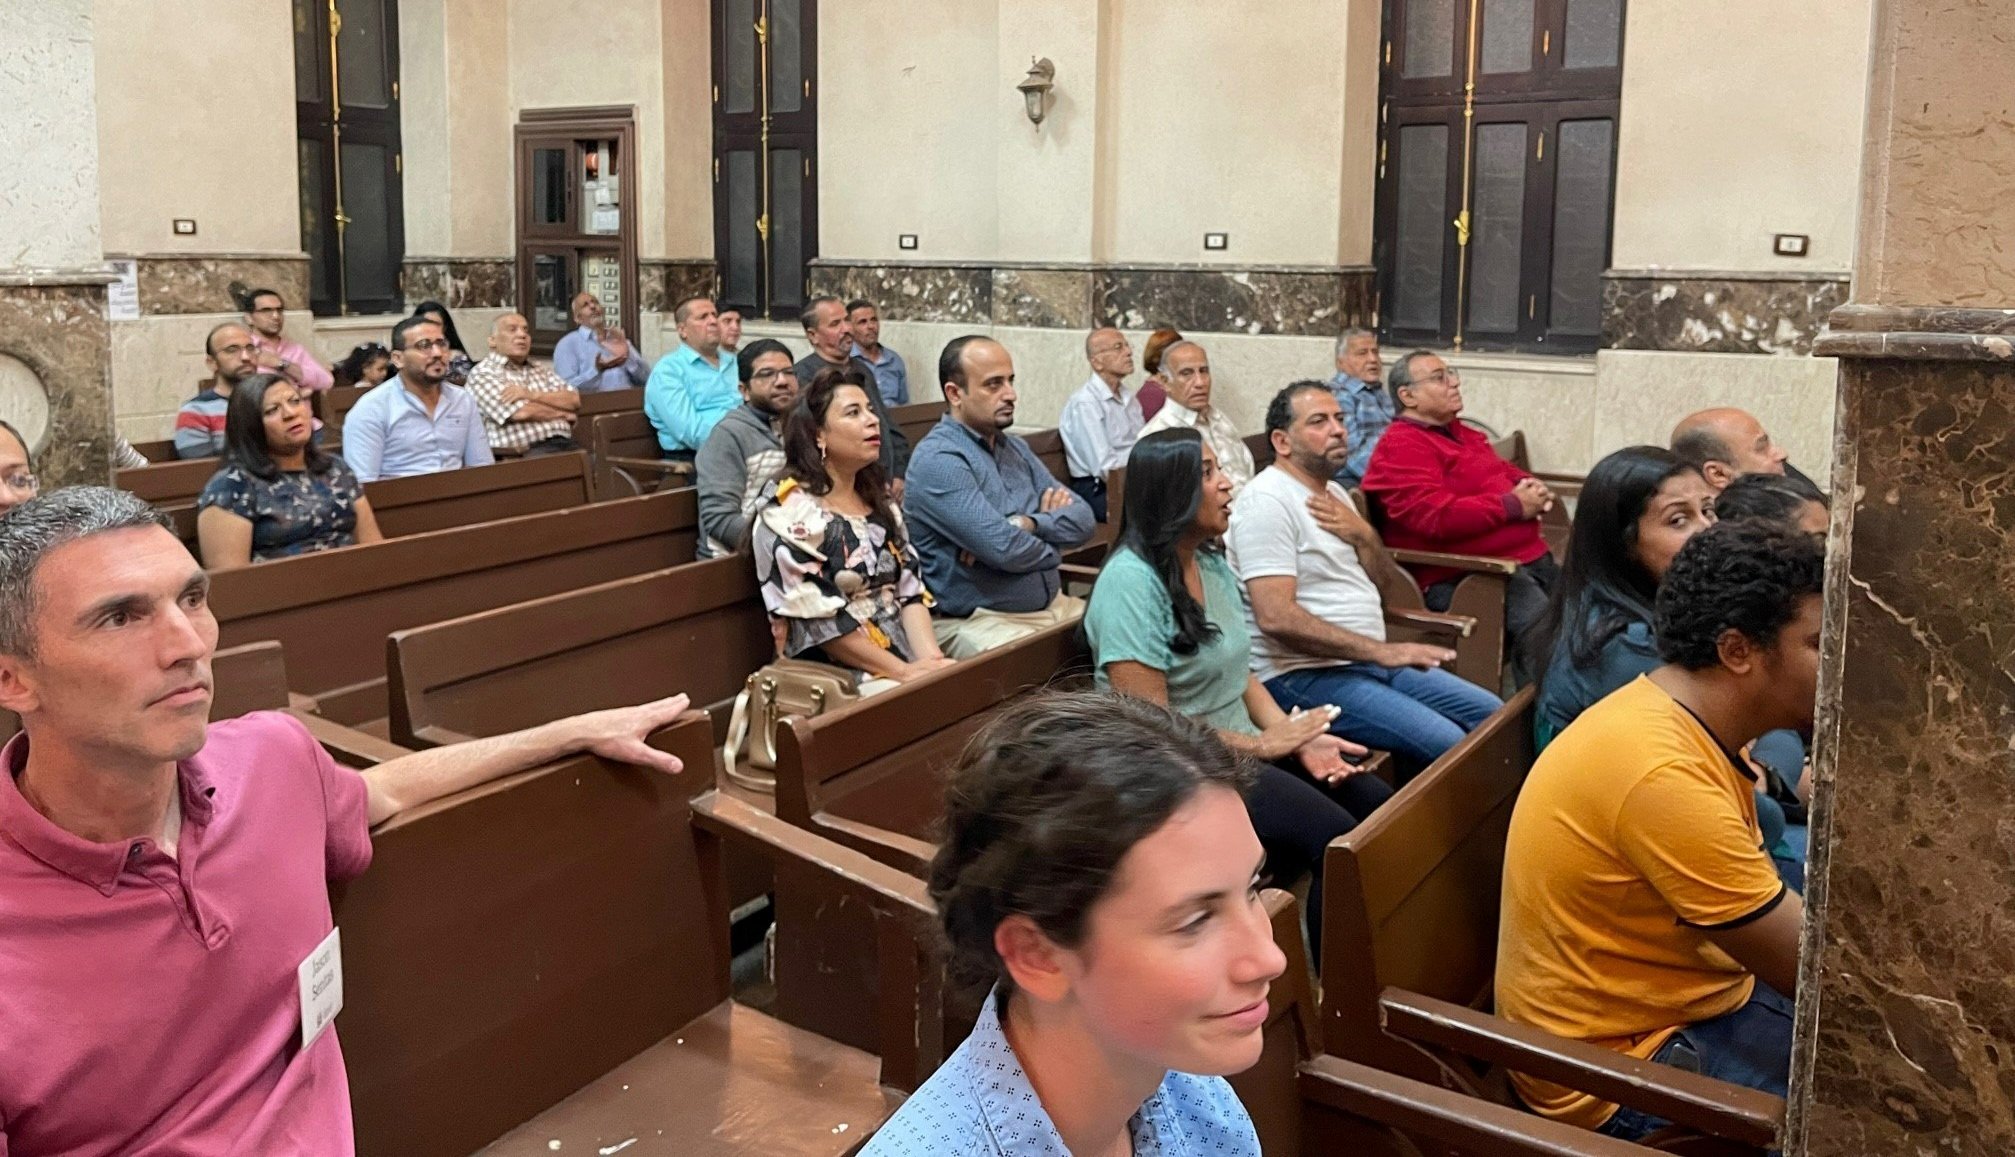  Gathered for Sunday evening worship with our Presbyterian family in Kom Ombo 